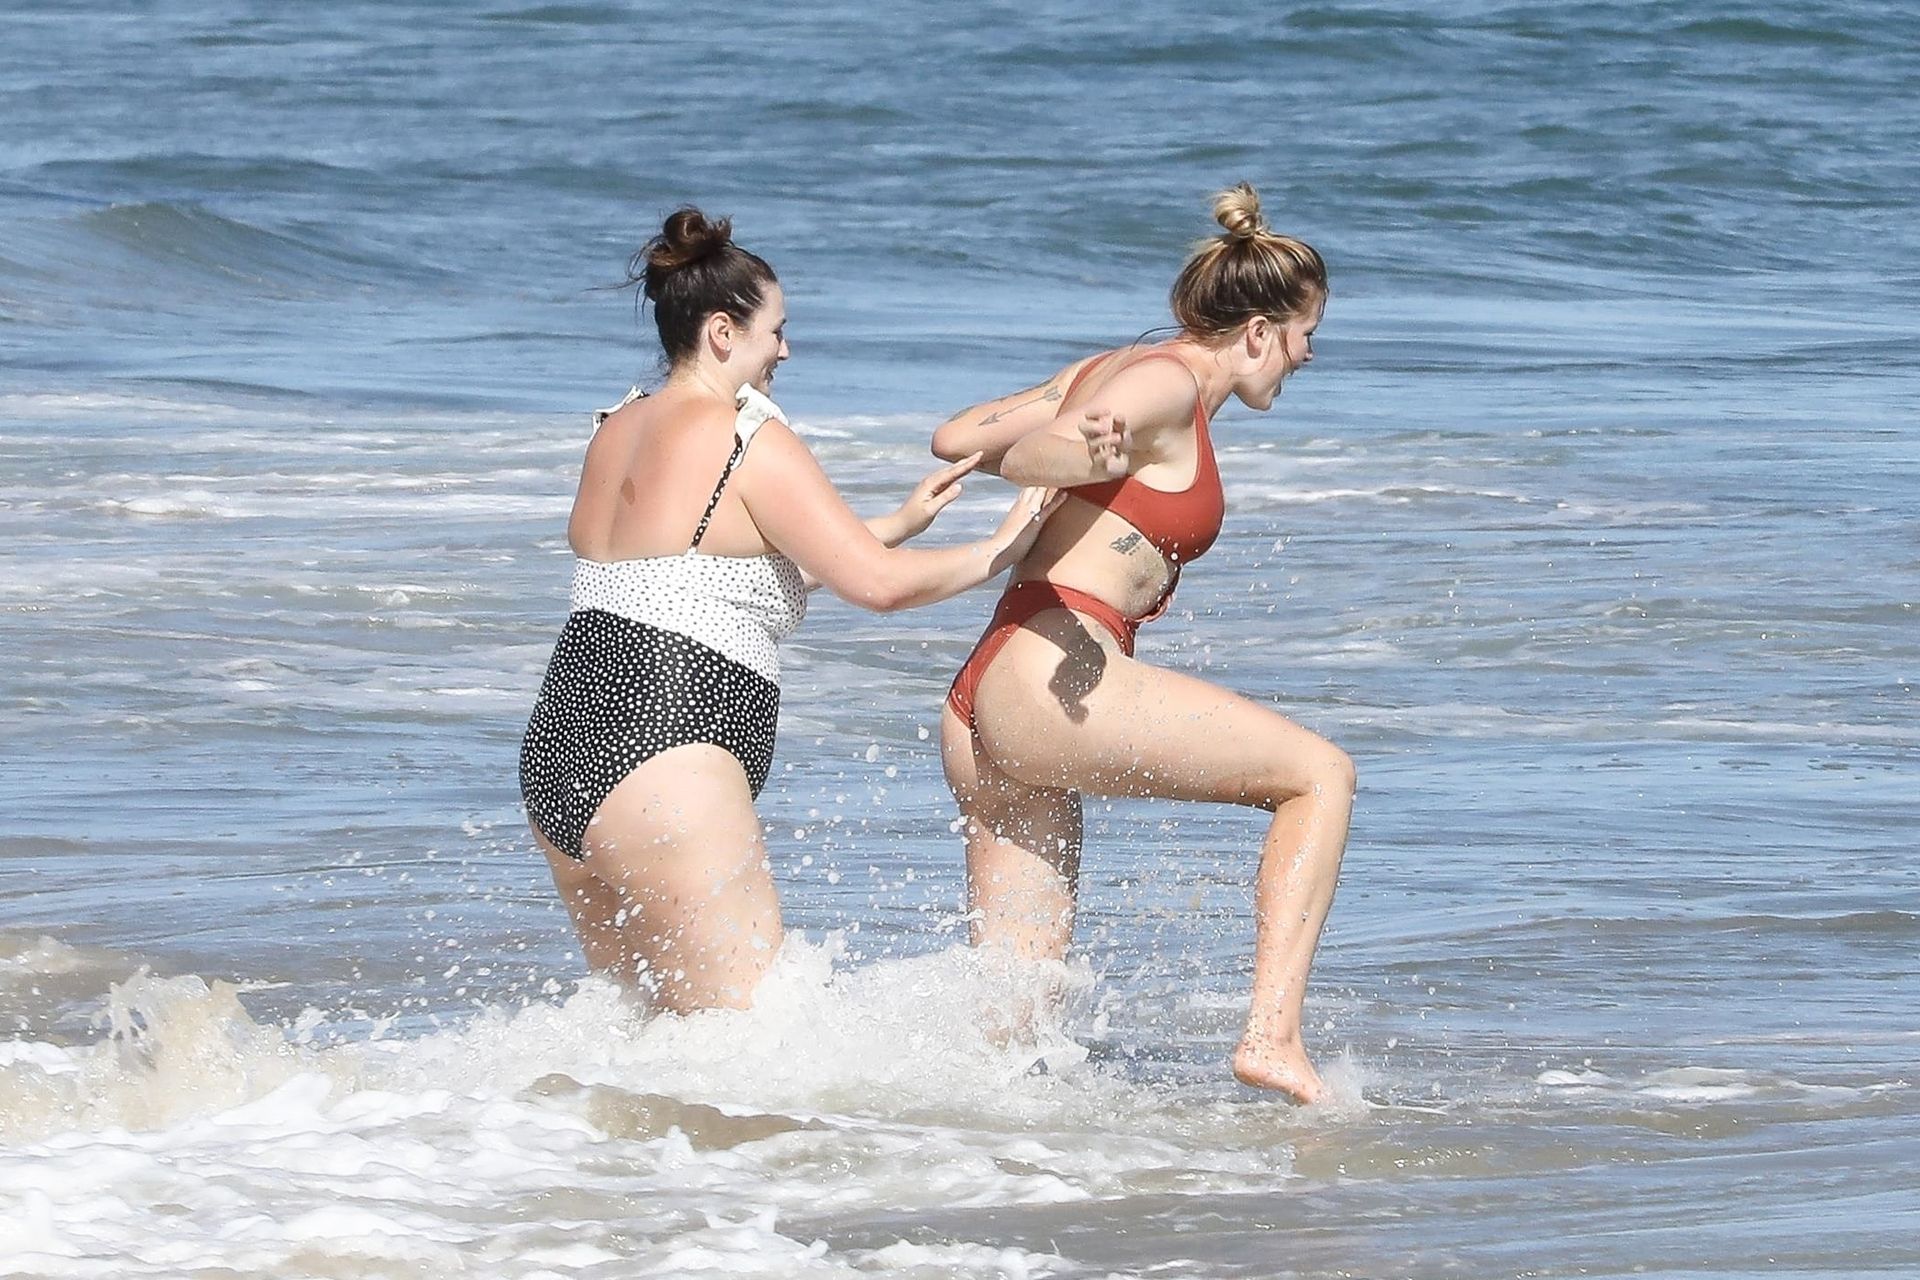 Ireland Baldw
in Stuns in a Swimsuit While Enjoying a Beach Day (297 New Photos)